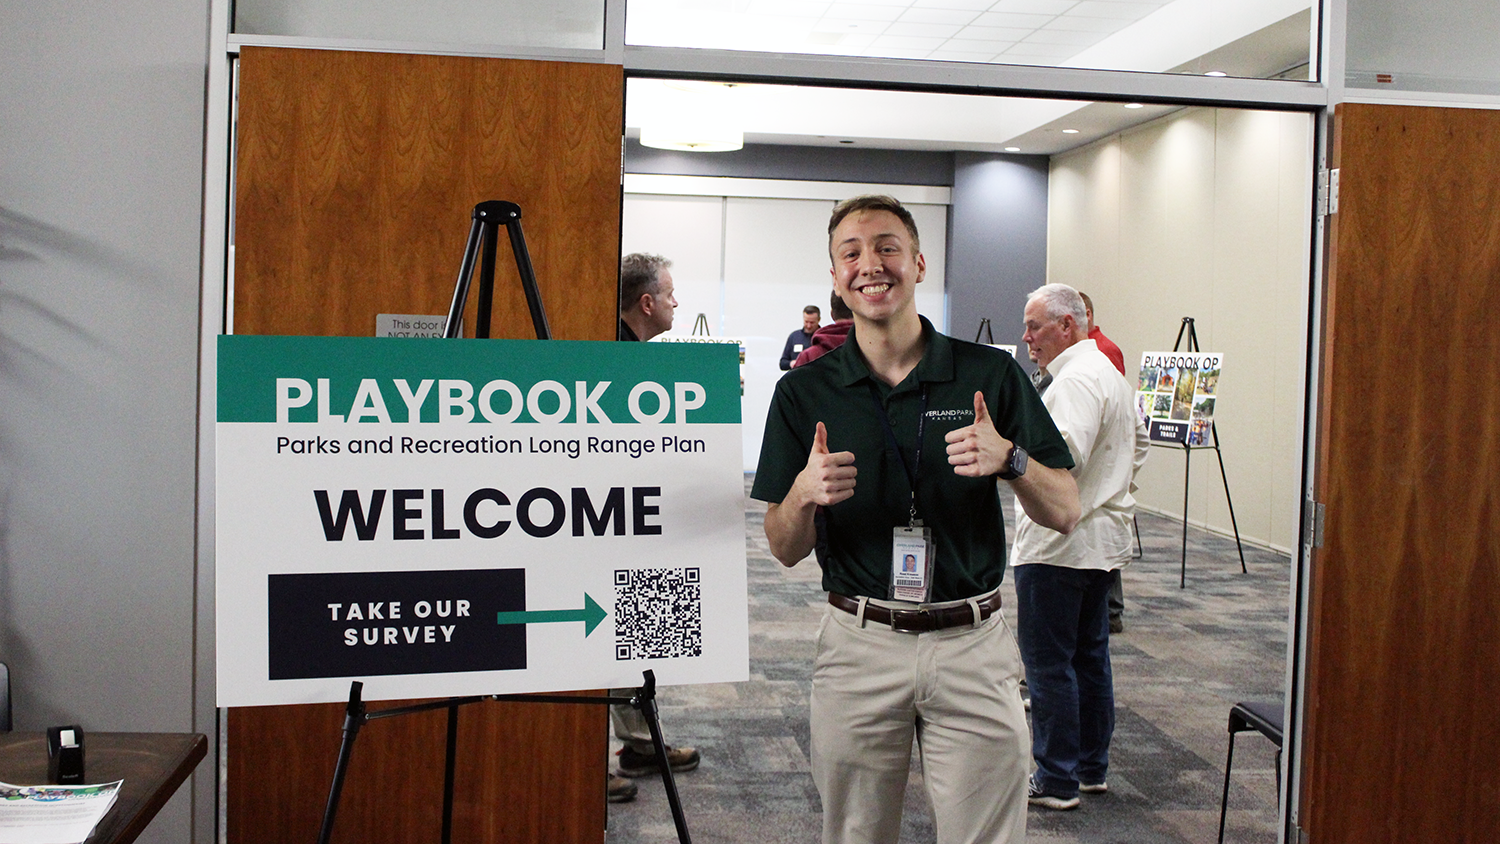 City staff member holds two thumbs up next to a Playbook OP open house sign.